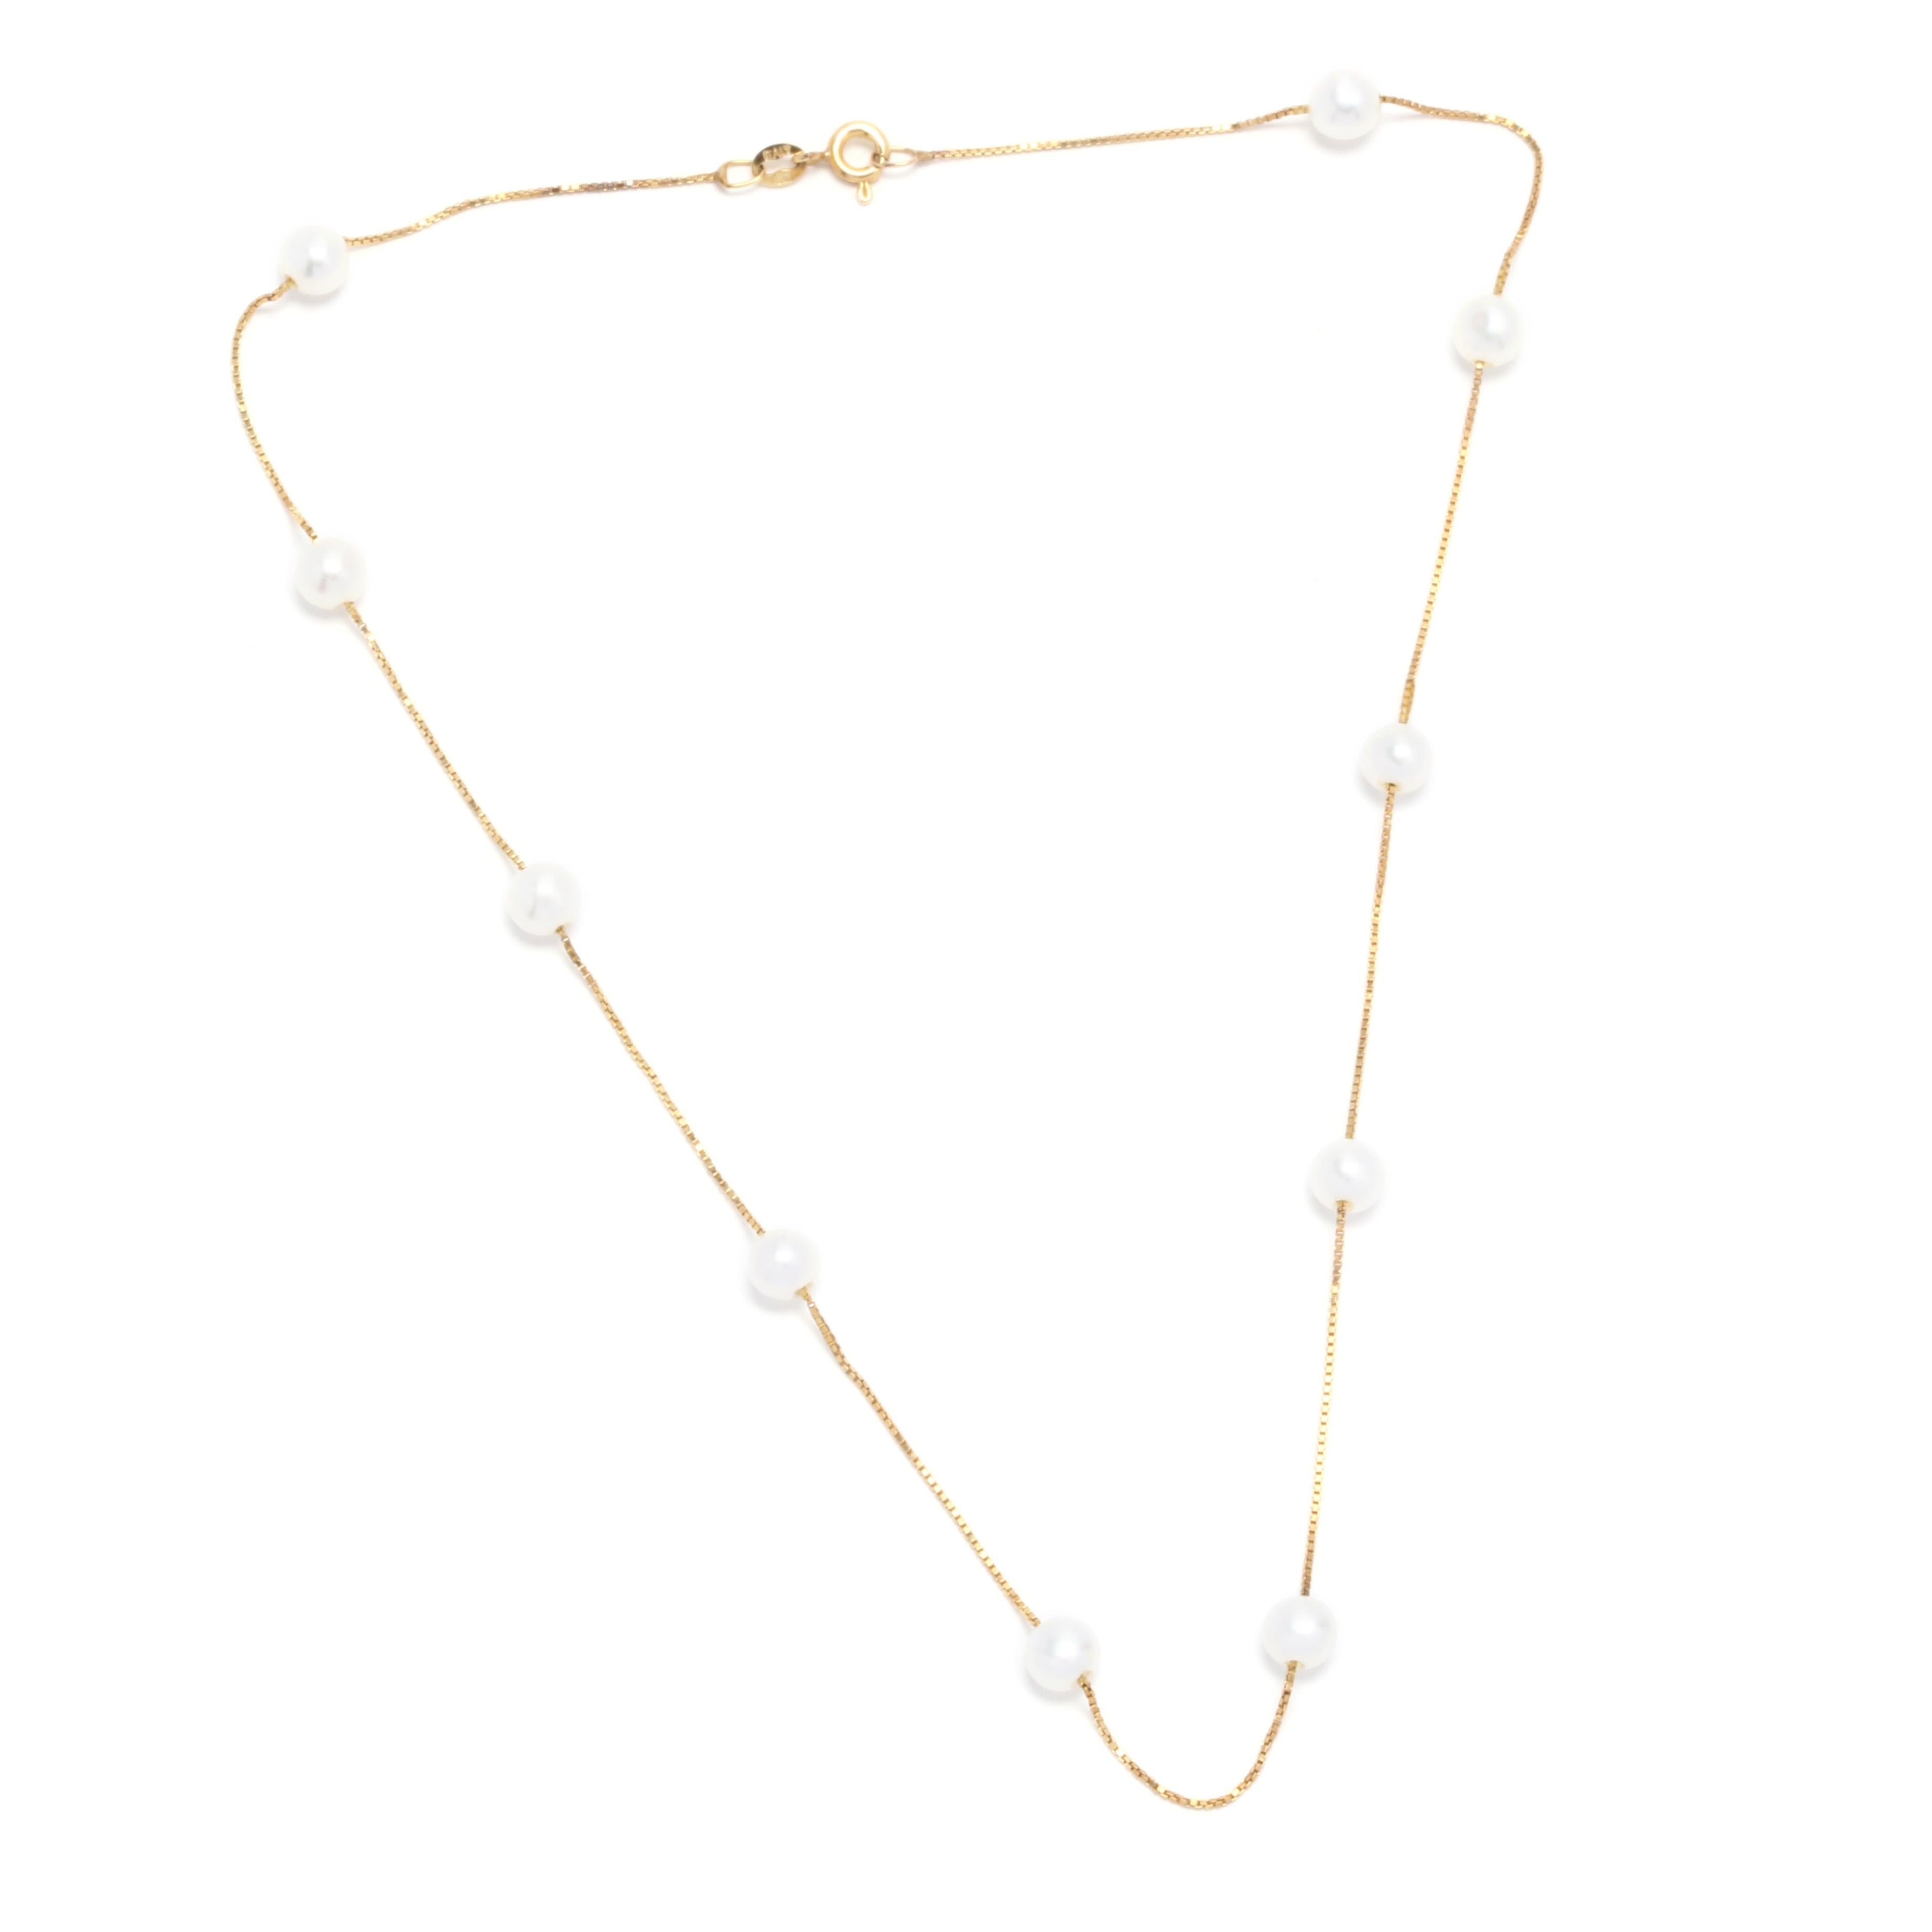 A 14 karat yellow gold and pearl tin cup necklace. A pearl by the yard necklace with 10 round white pearl stations set on a thin box chain and a spring ring clasp.

Stones:
- pearls
- round beads, 10 stones
- 5.4 - 5.7 mm

Length: 16 in.

2.33